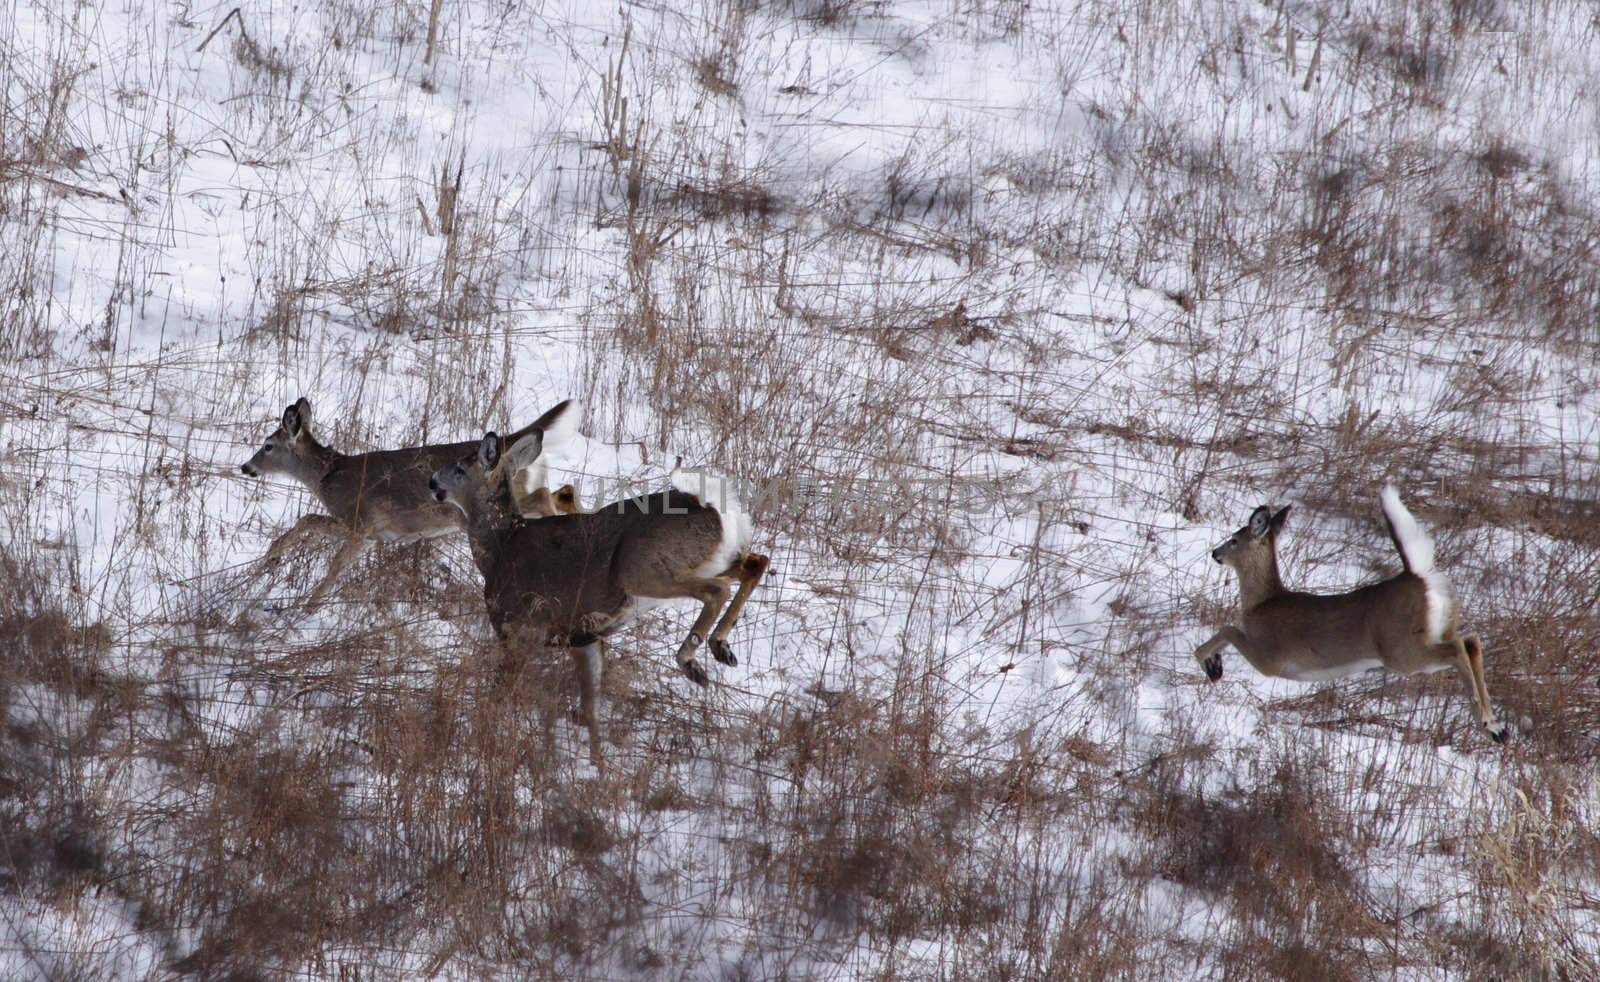 White-tailed deer (Odocoileus virginianus) flee across a snow covered field, in Ontario, Canada.